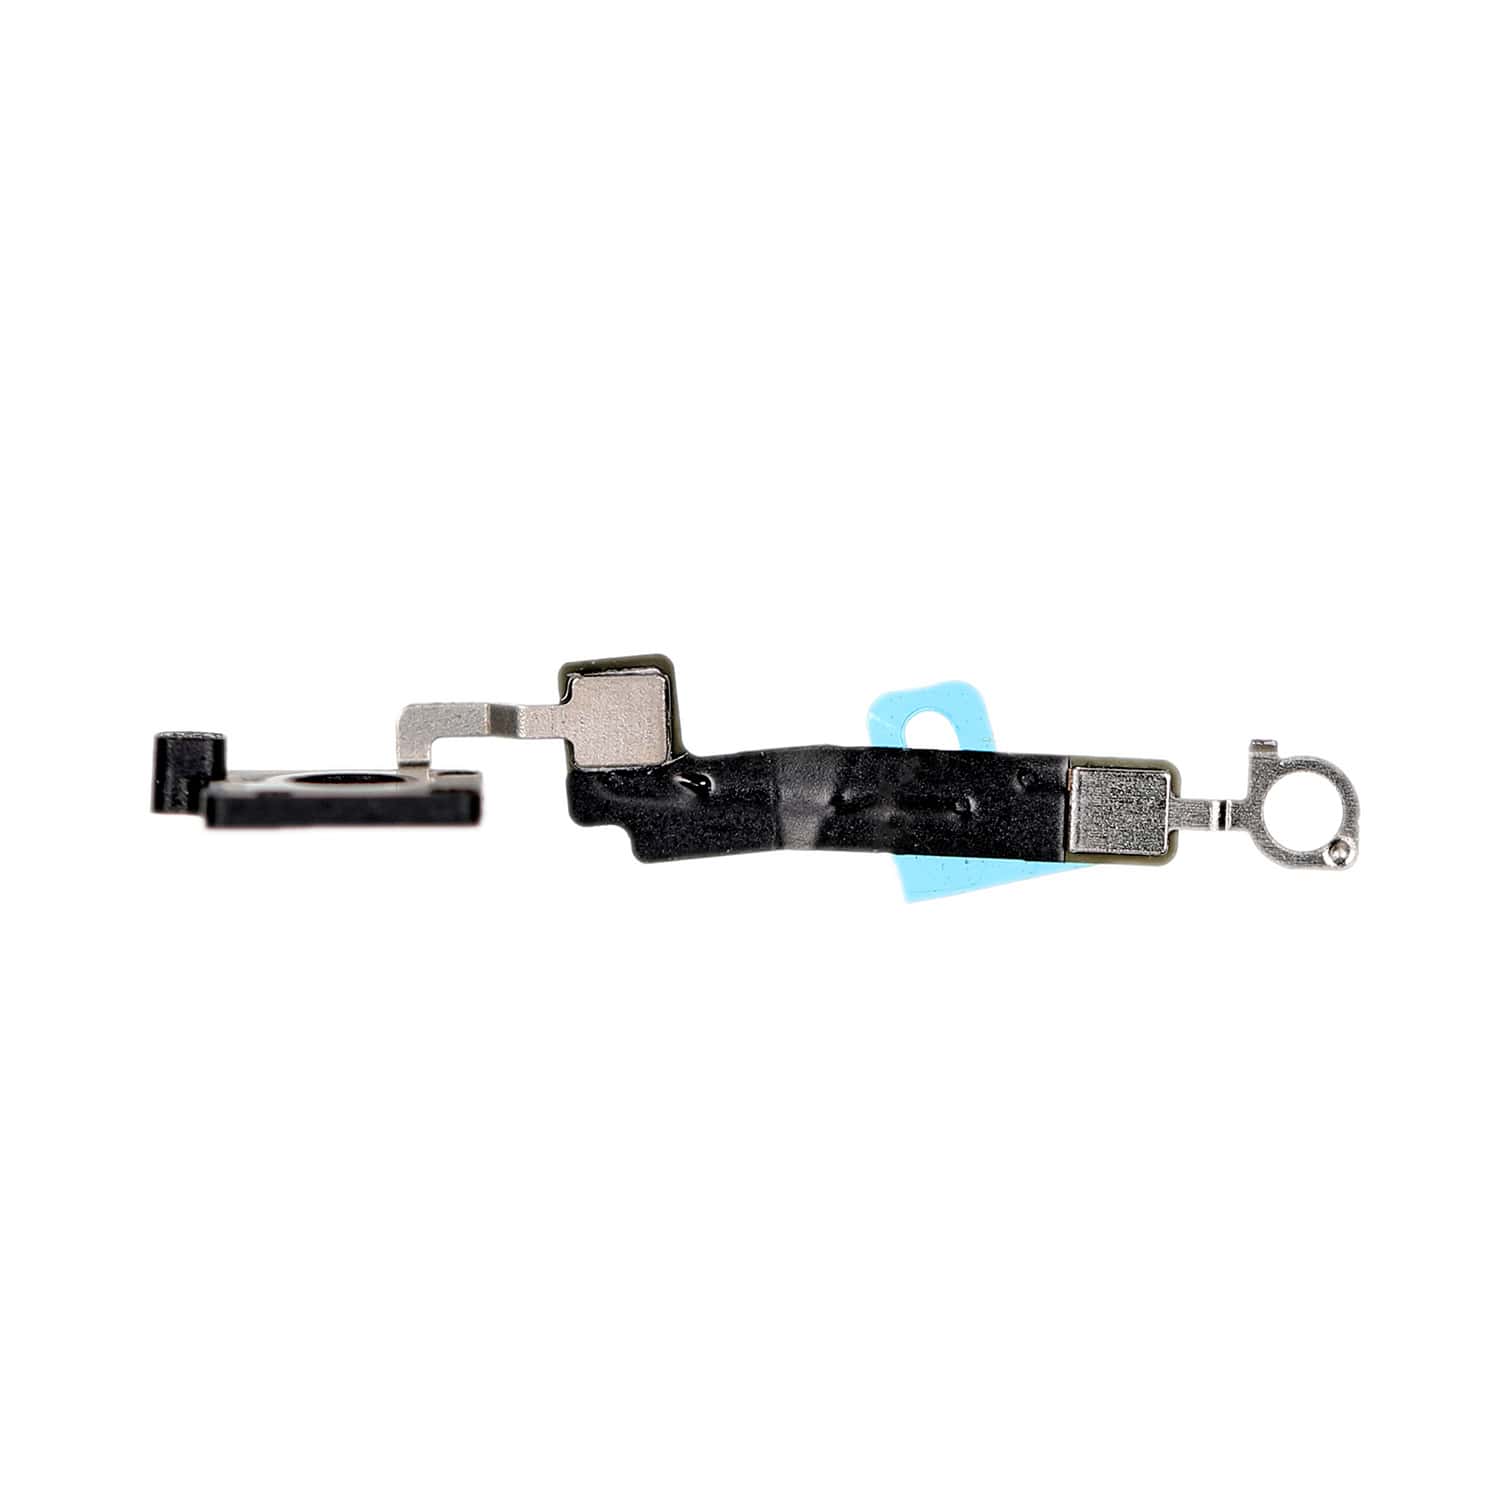 BLUETOOTH ANTENNA FLEX CABLE FOR IPHONE XR